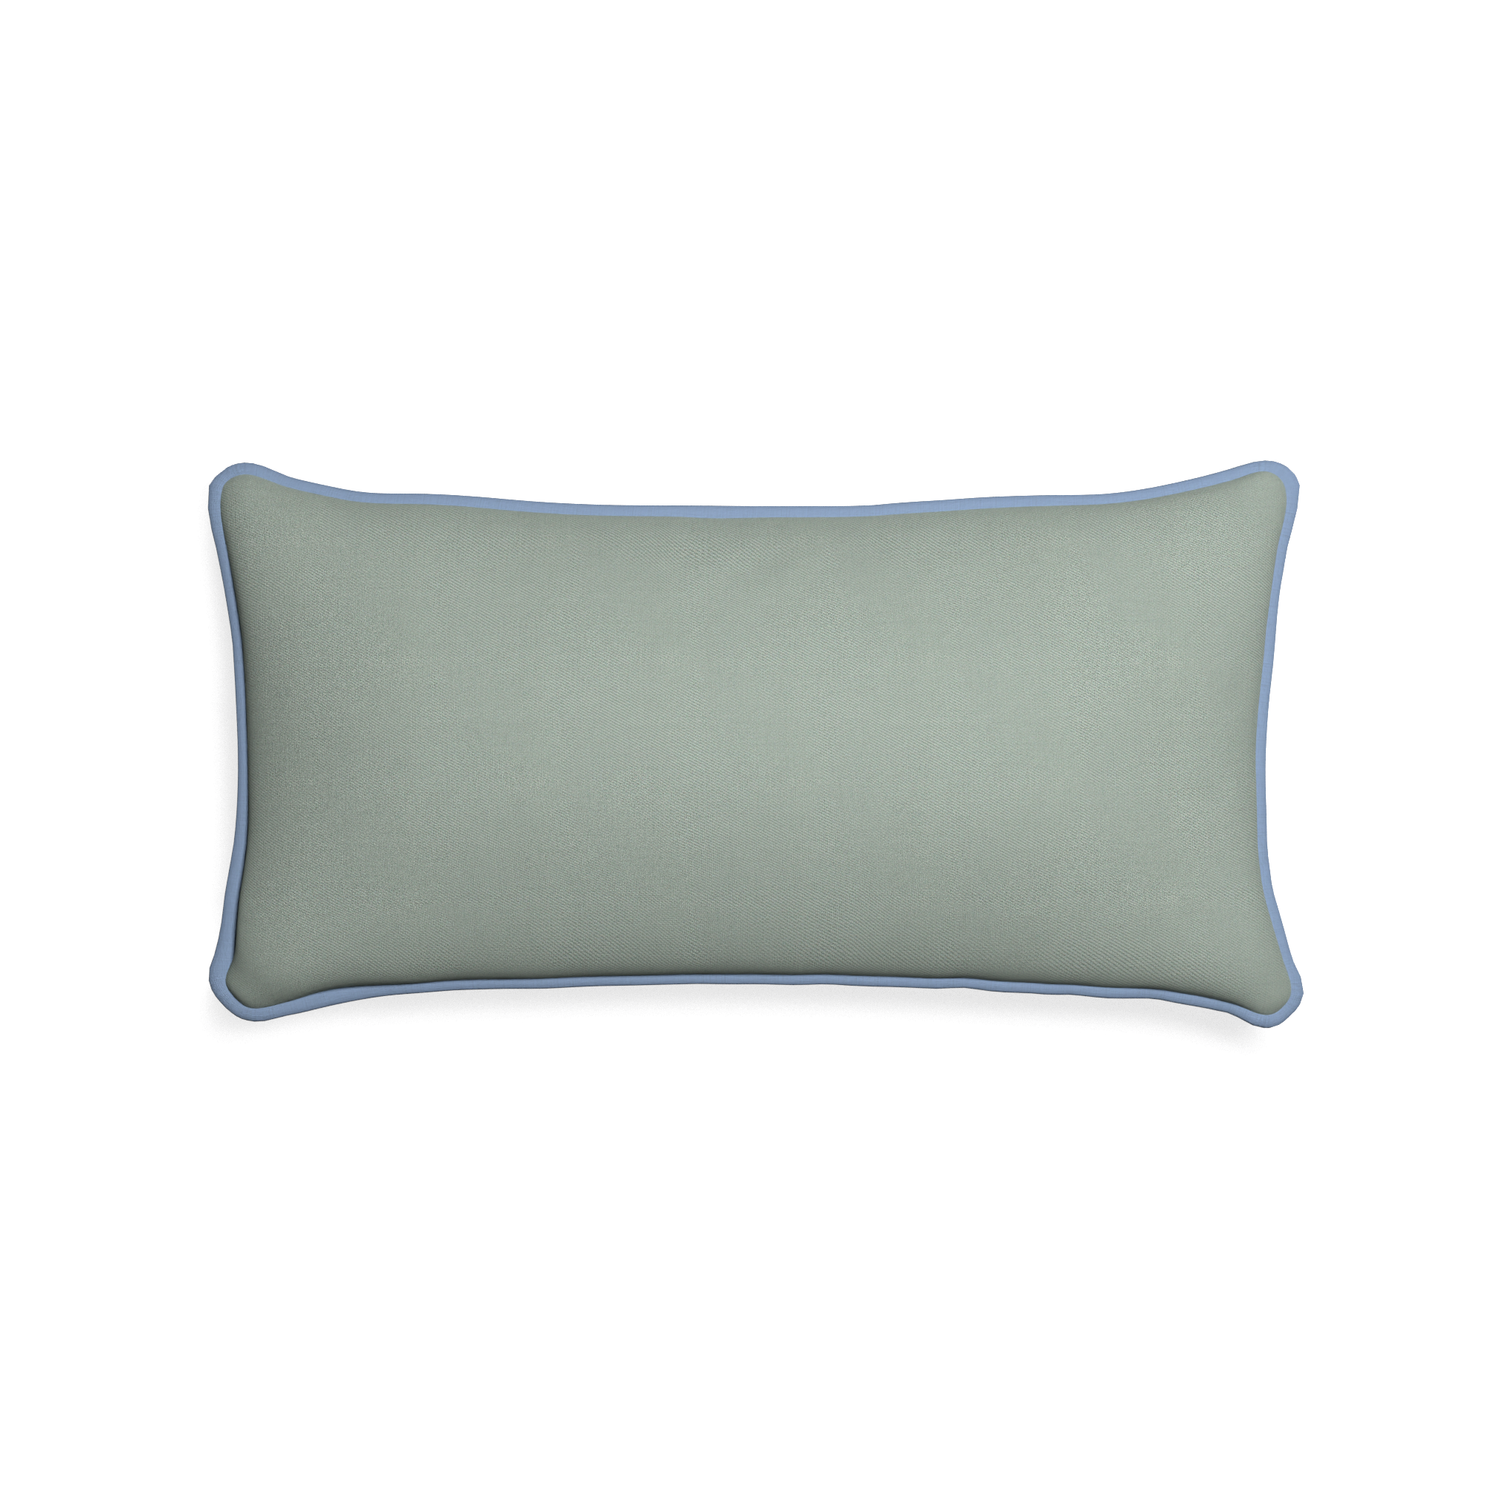 Midi-lumbar sage custom sage green cottonpillow with sky piping on white background